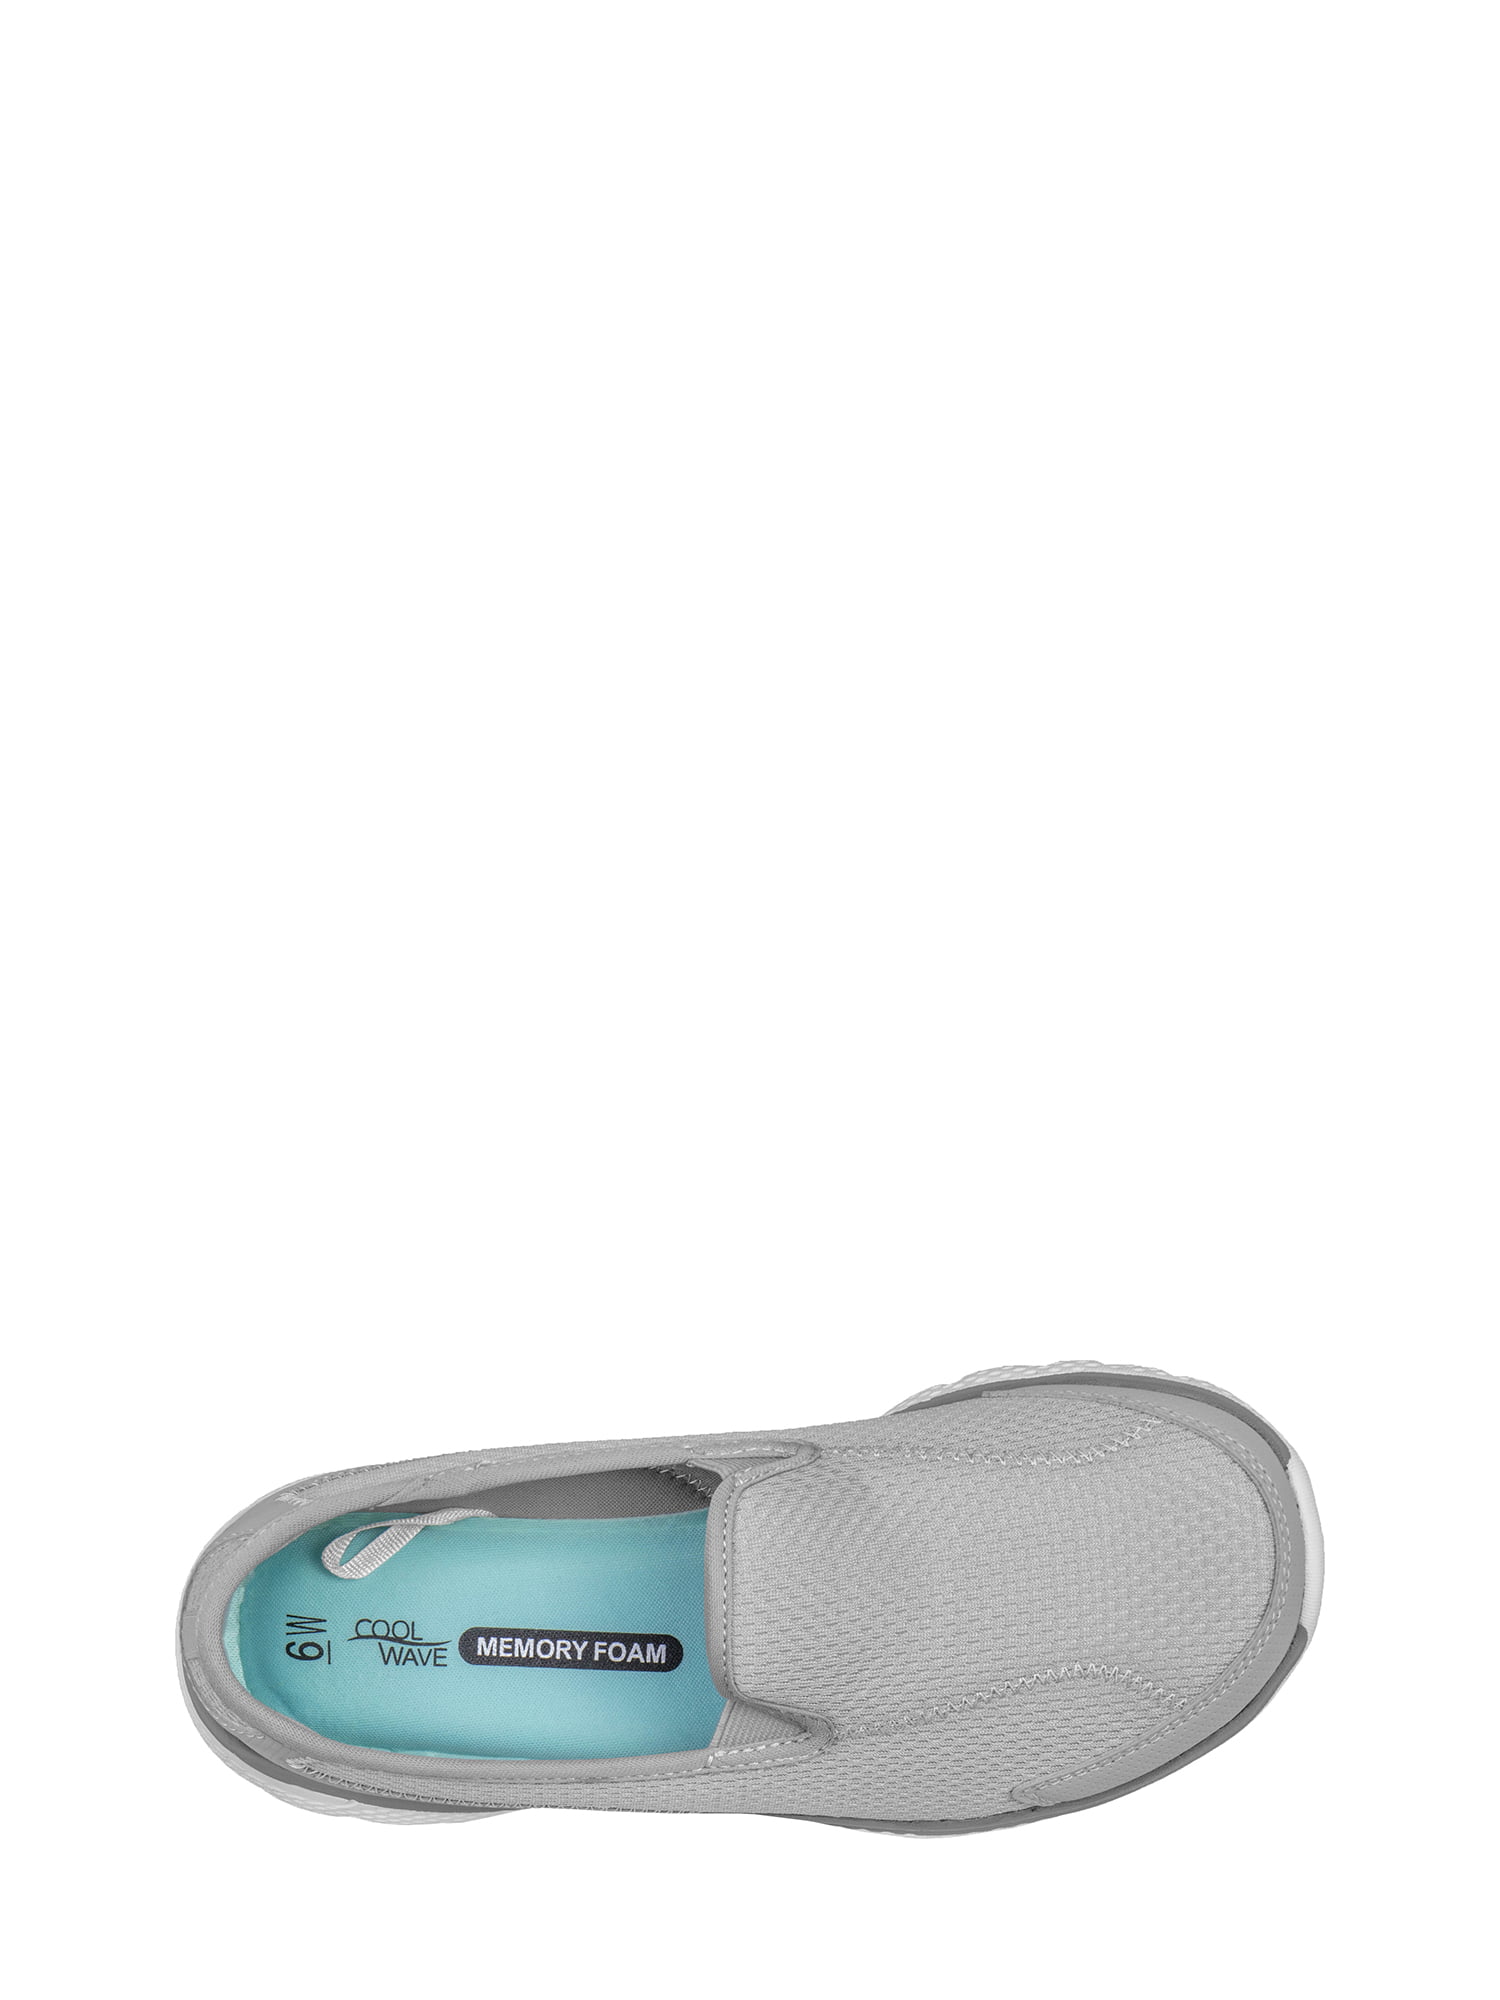 athletic works women's essential slip on athletic shoe